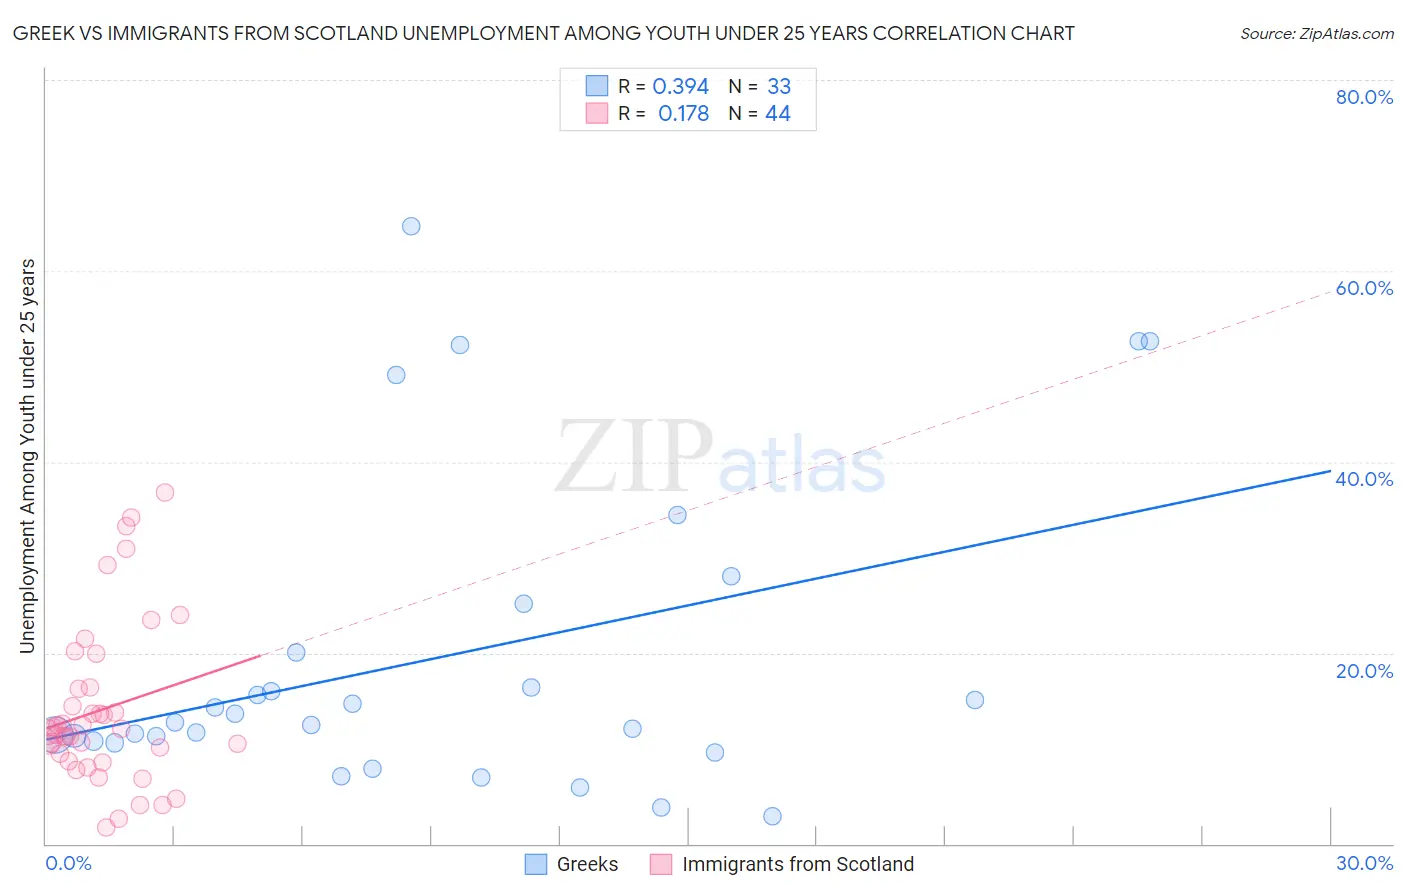 Greek vs Immigrants from Scotland Unemployment Among Youth under 25 years